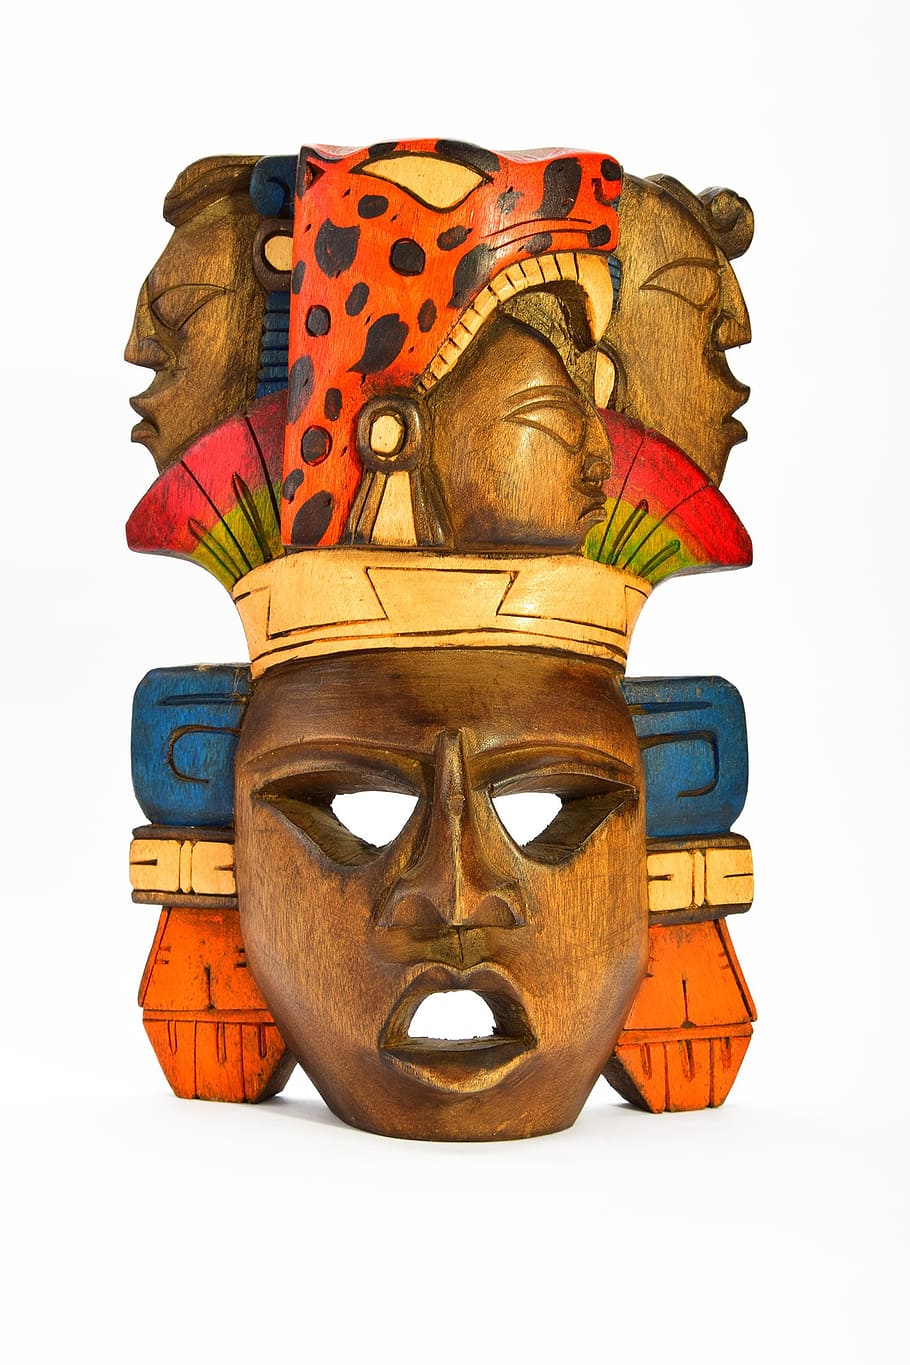 multicolored, tribal, wooden, mask decor, mask, isolated, carved, painted, indian, aztec